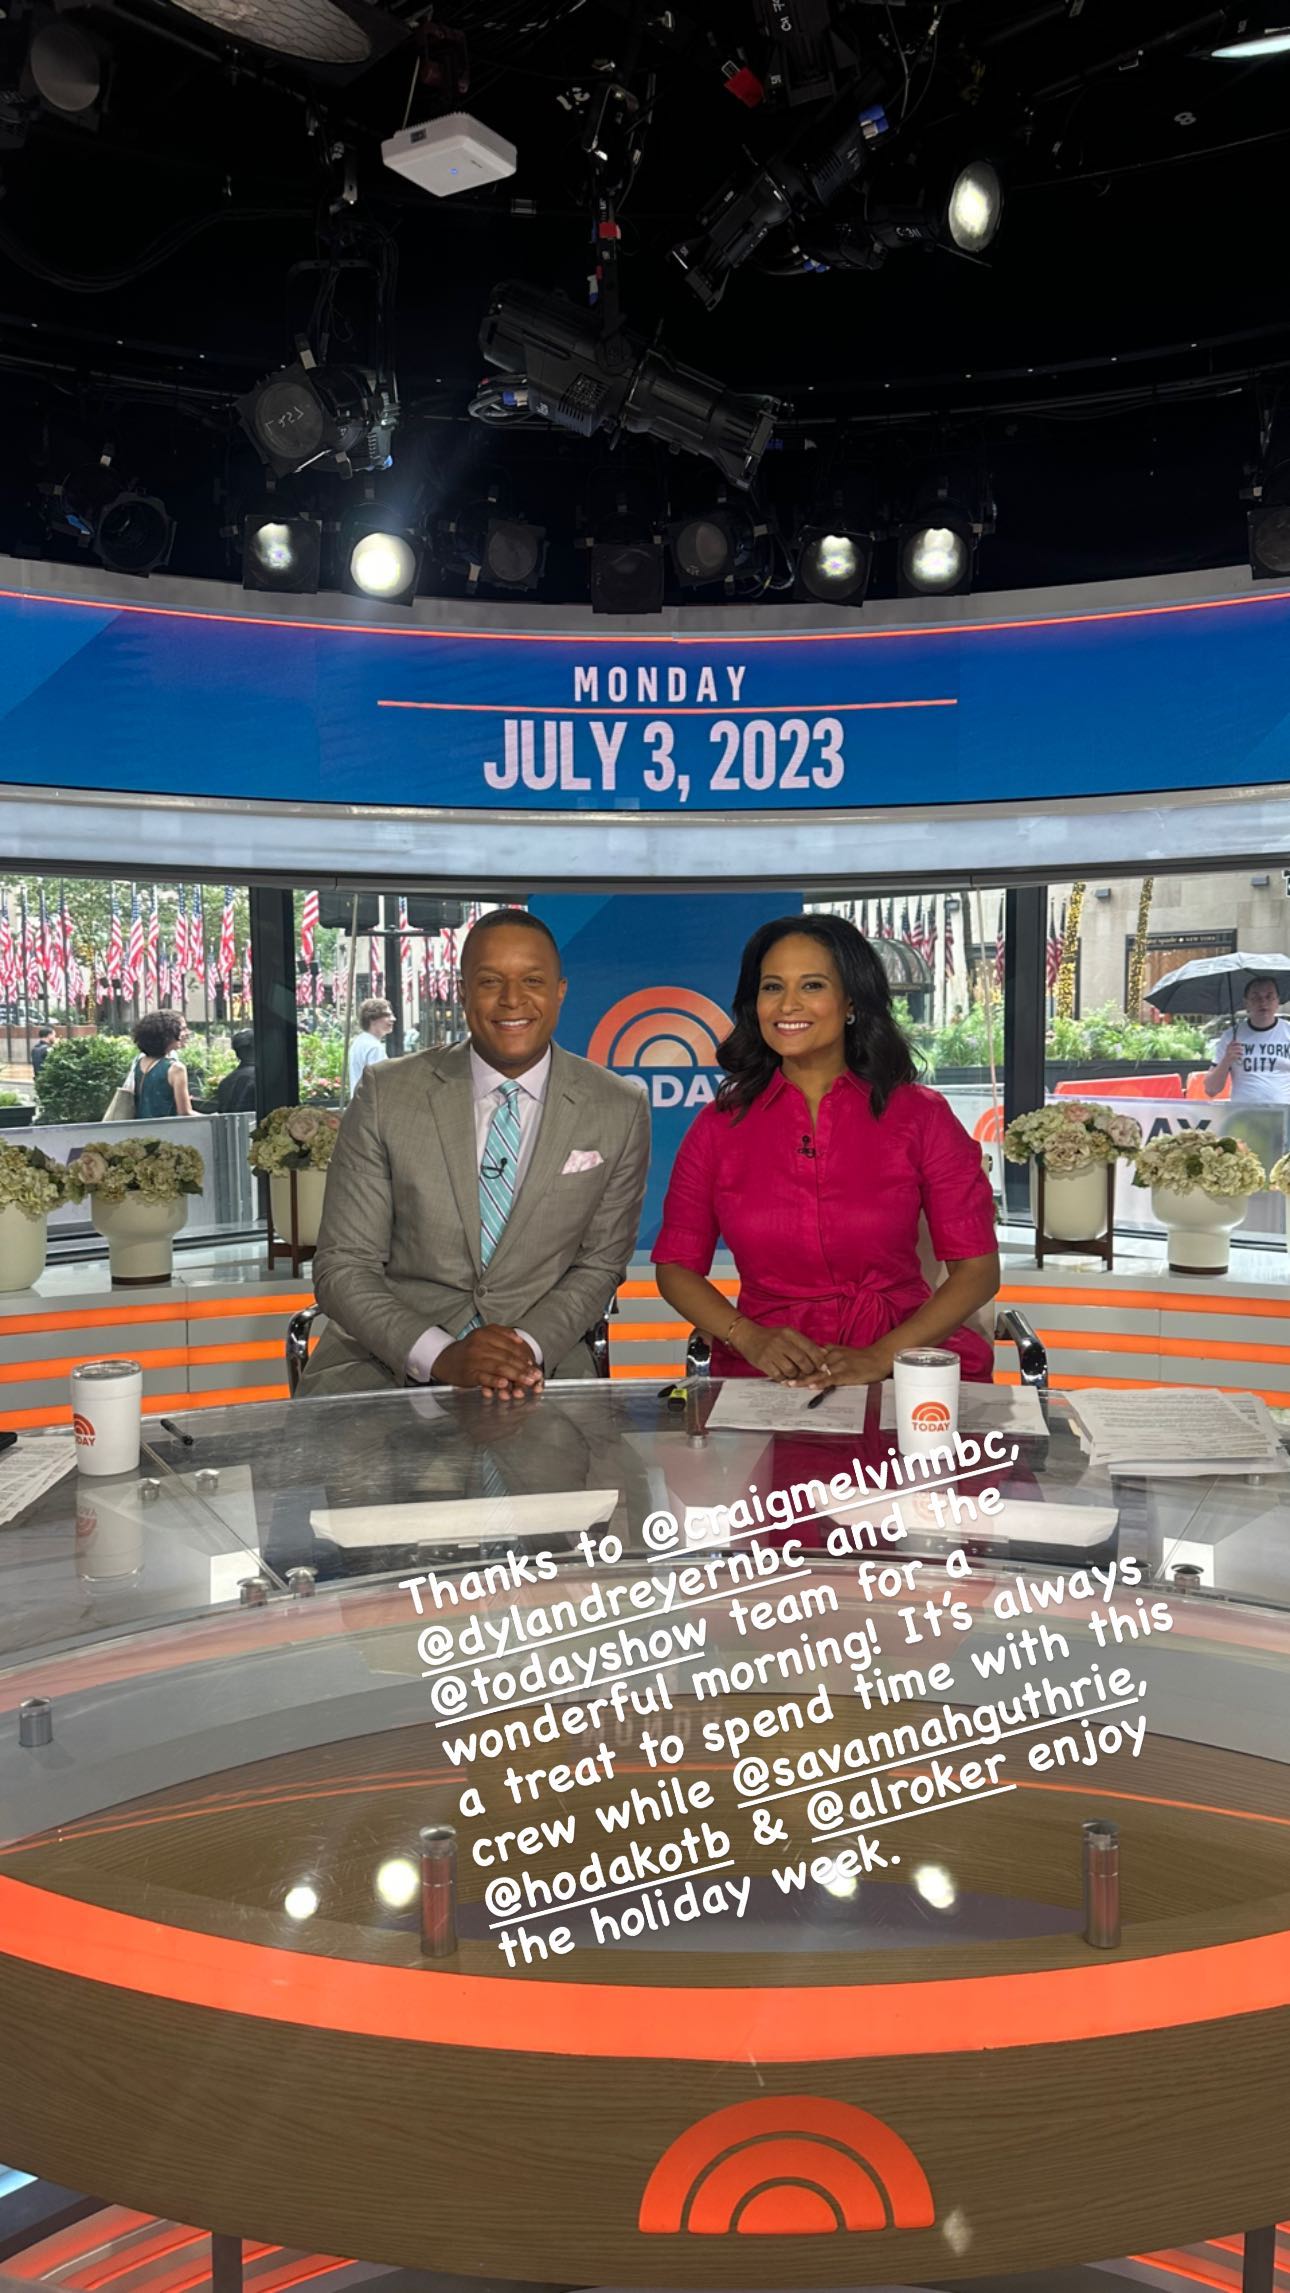 NBC personality Kristen Welker thanked the Today team for a 'wonderful morning' show